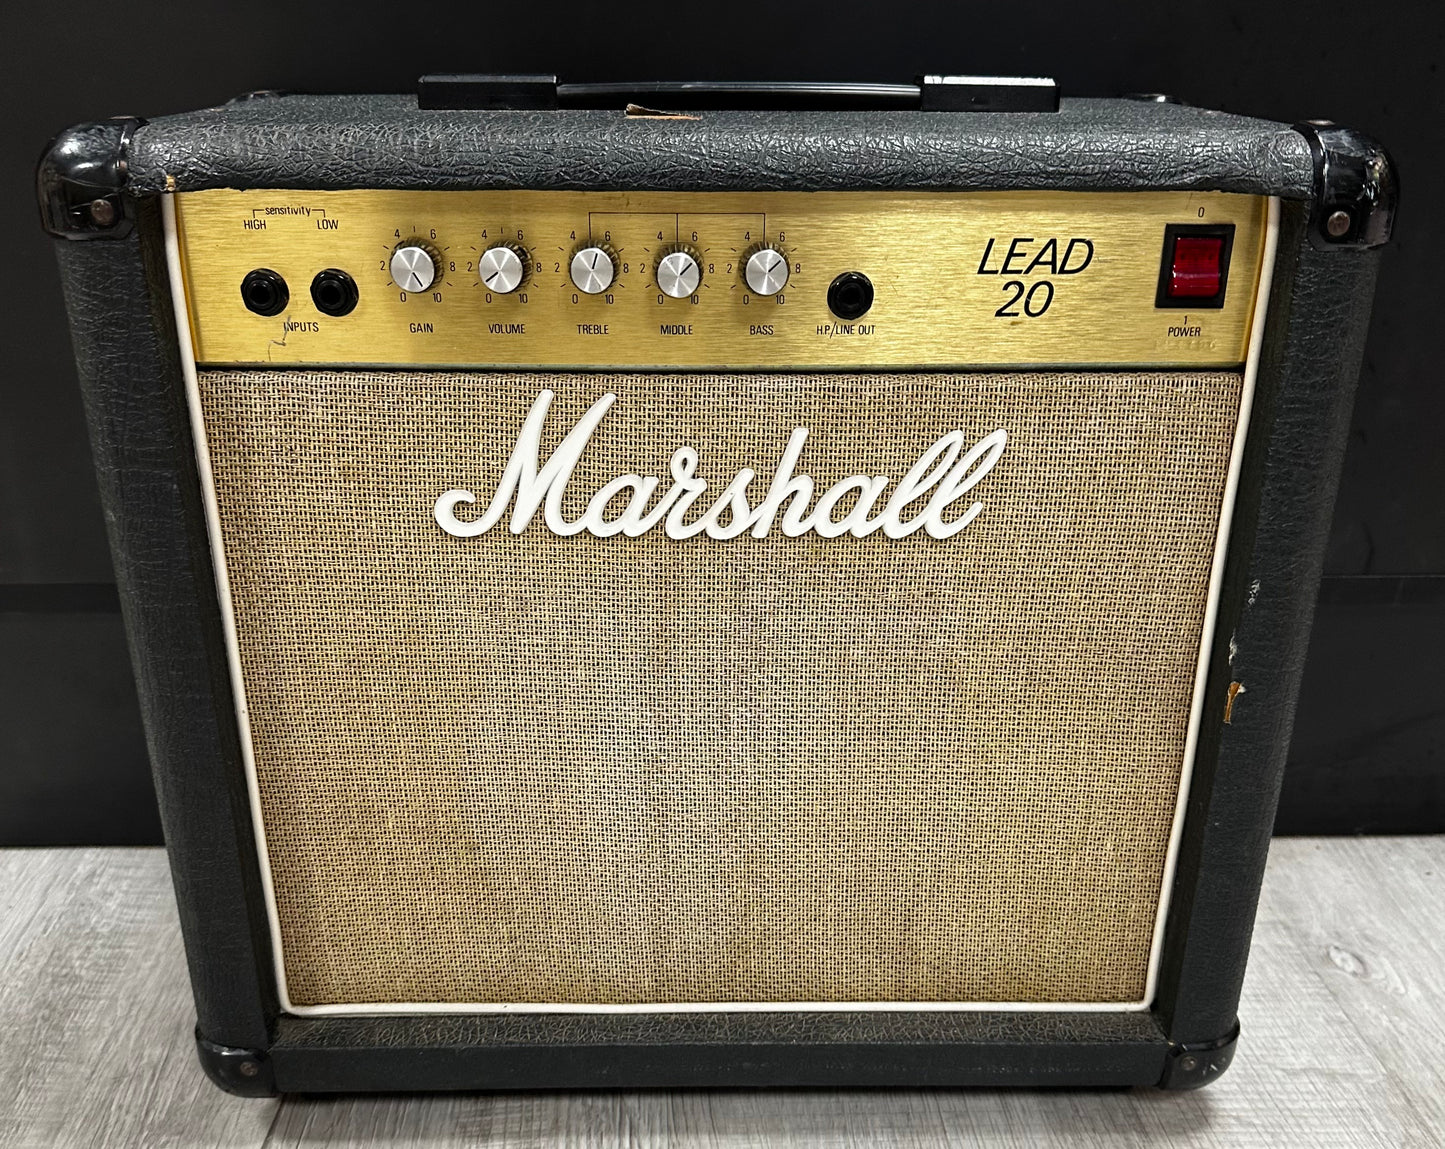 Front view of Used Marshall Lead 20 5002 20 Watt Amp 